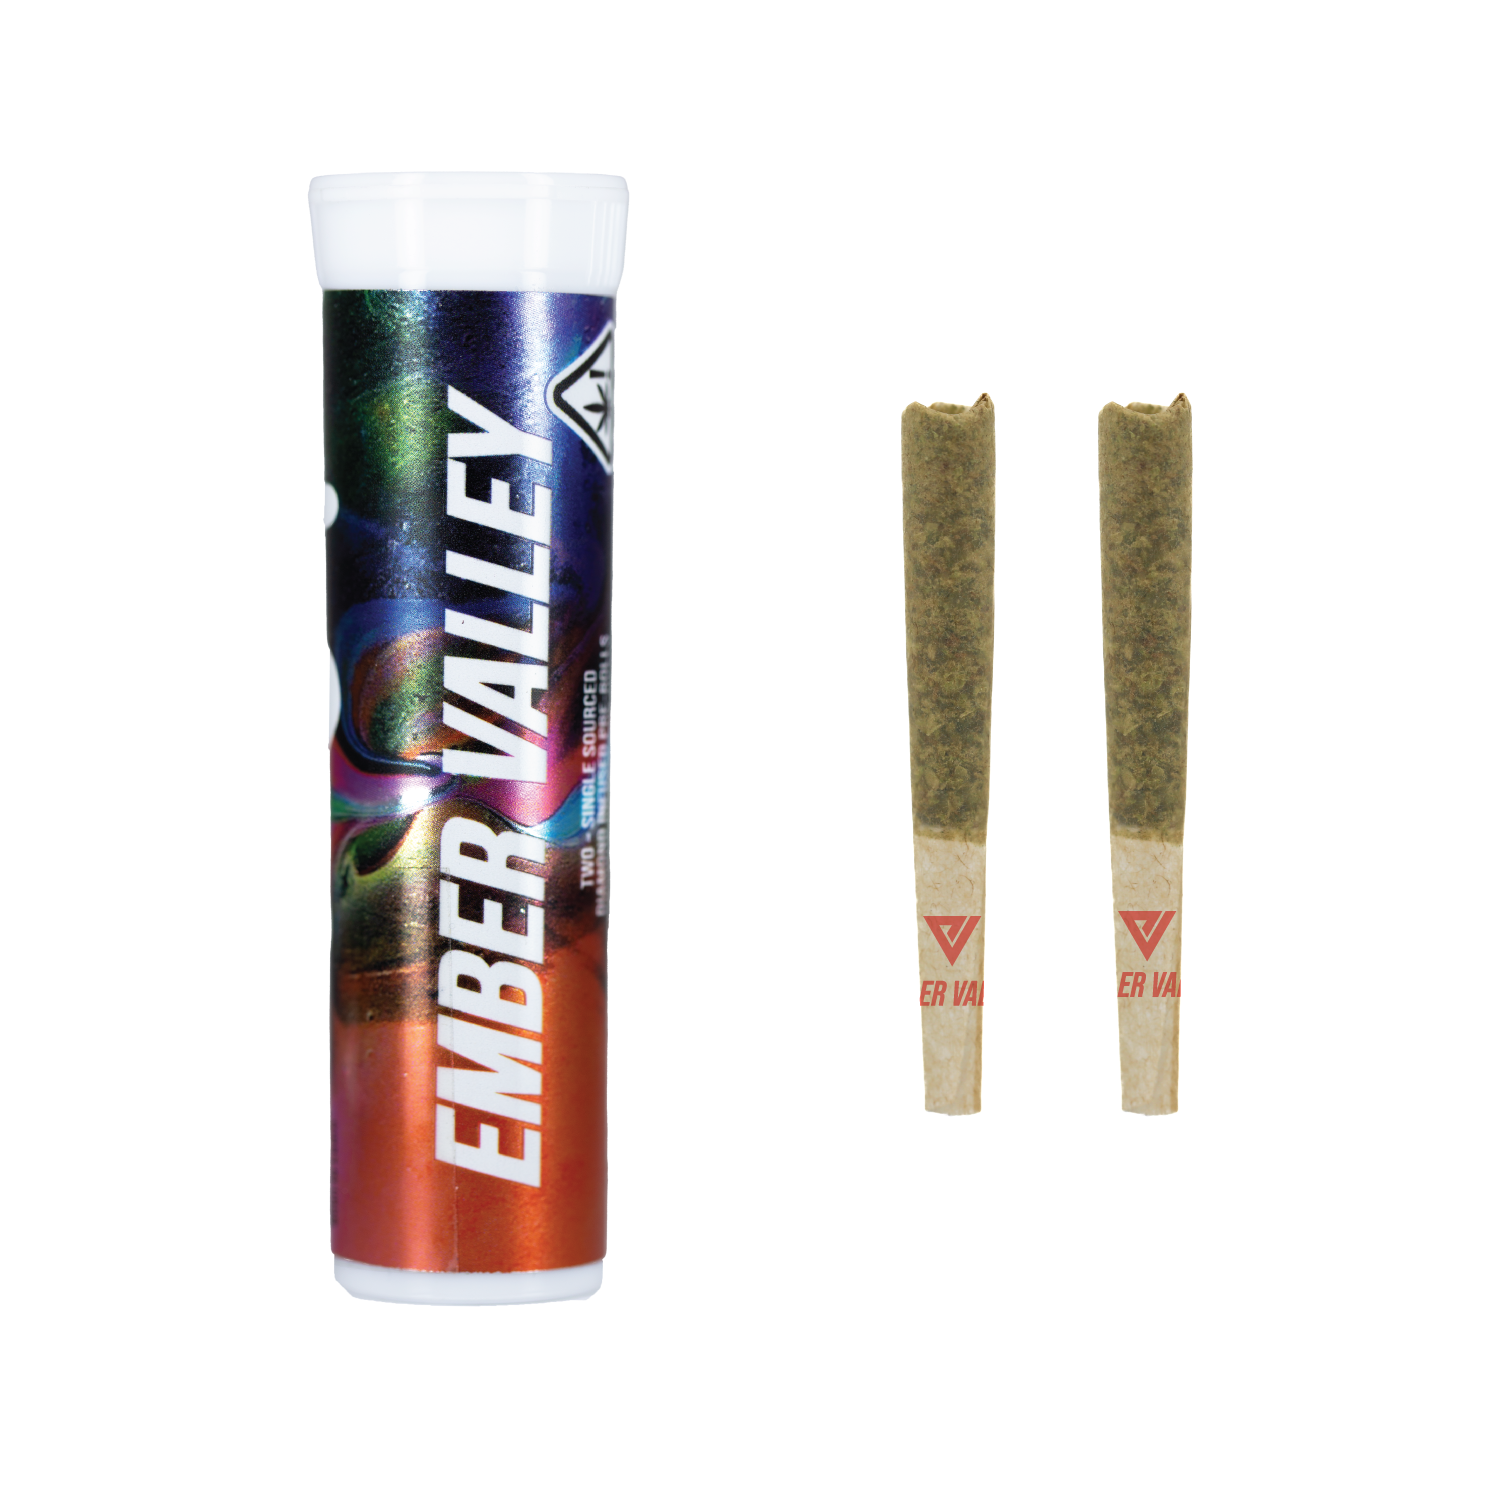 Melted Strawberries Infused Pre-Roll 2 Pack [.5G]